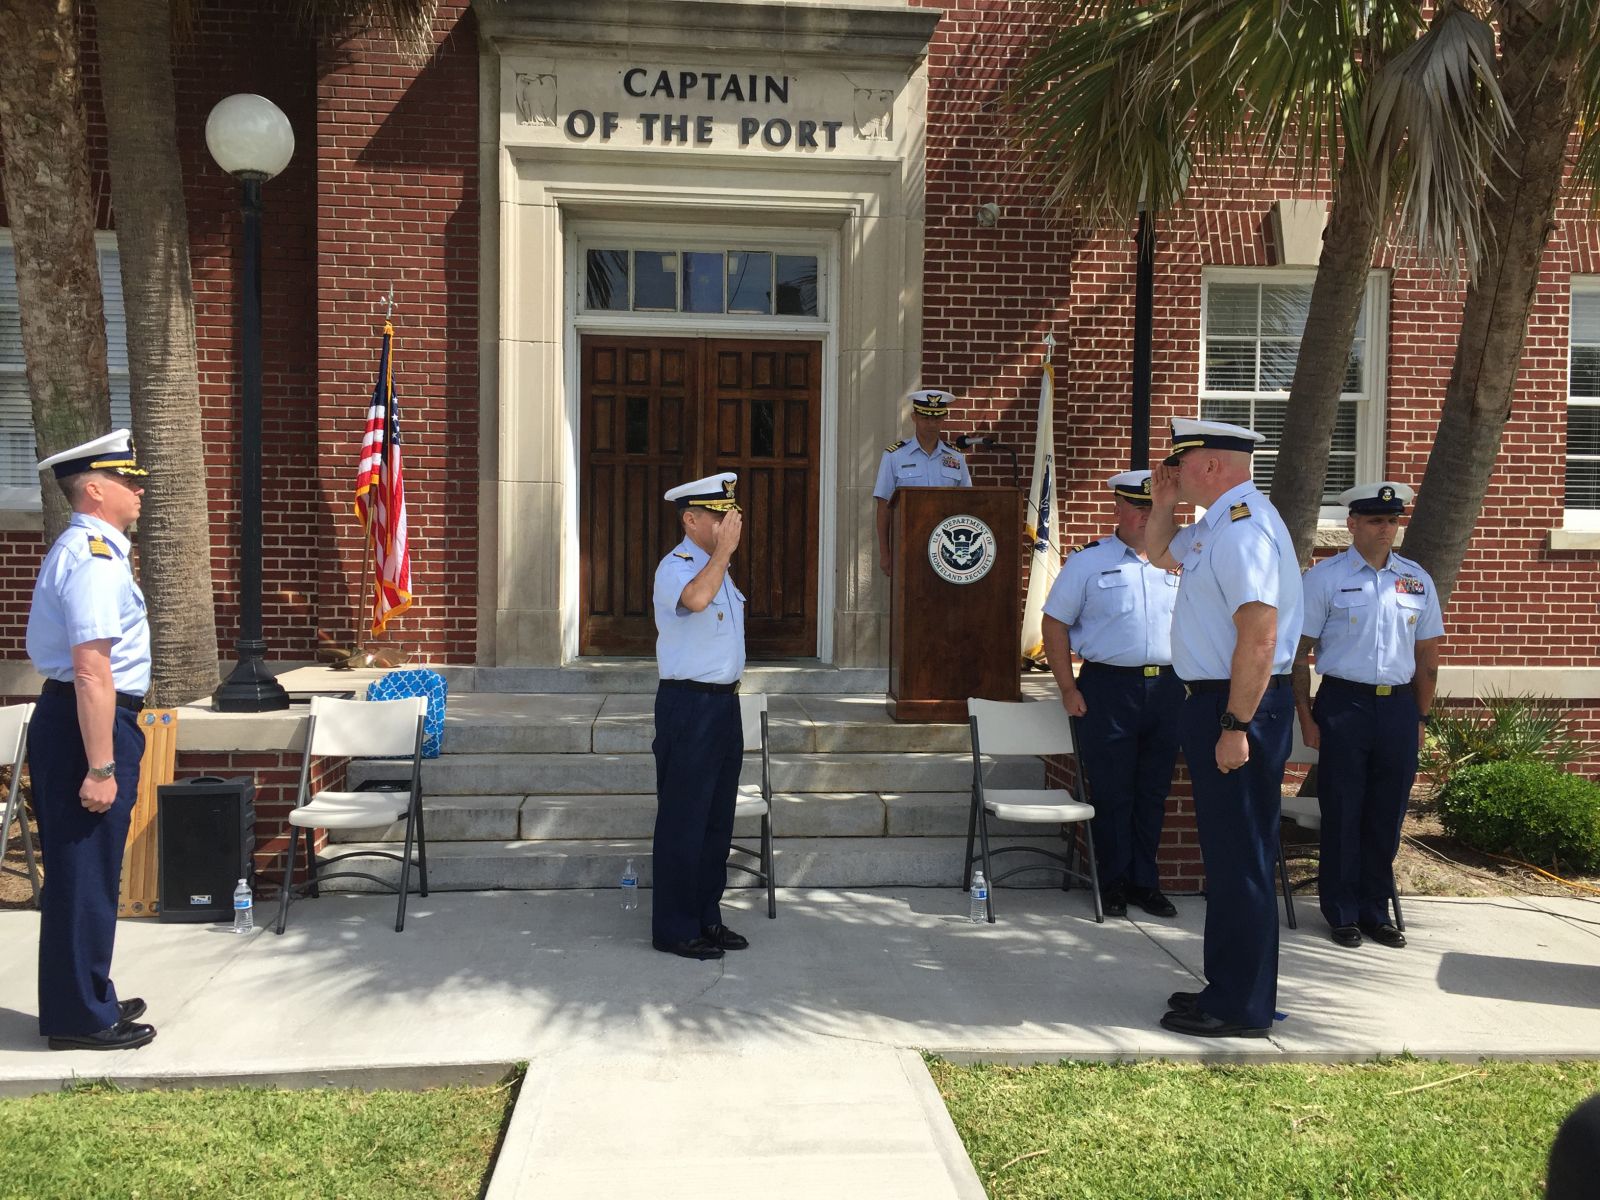 Coast Guard Sector Charleston held a change of command ceremony Tuesday during which Capt. John Reed (right) transferred command to Capt. John Cole. (Photo/Lt. j.g. Phillip VanderWeit for the Coast Guard)